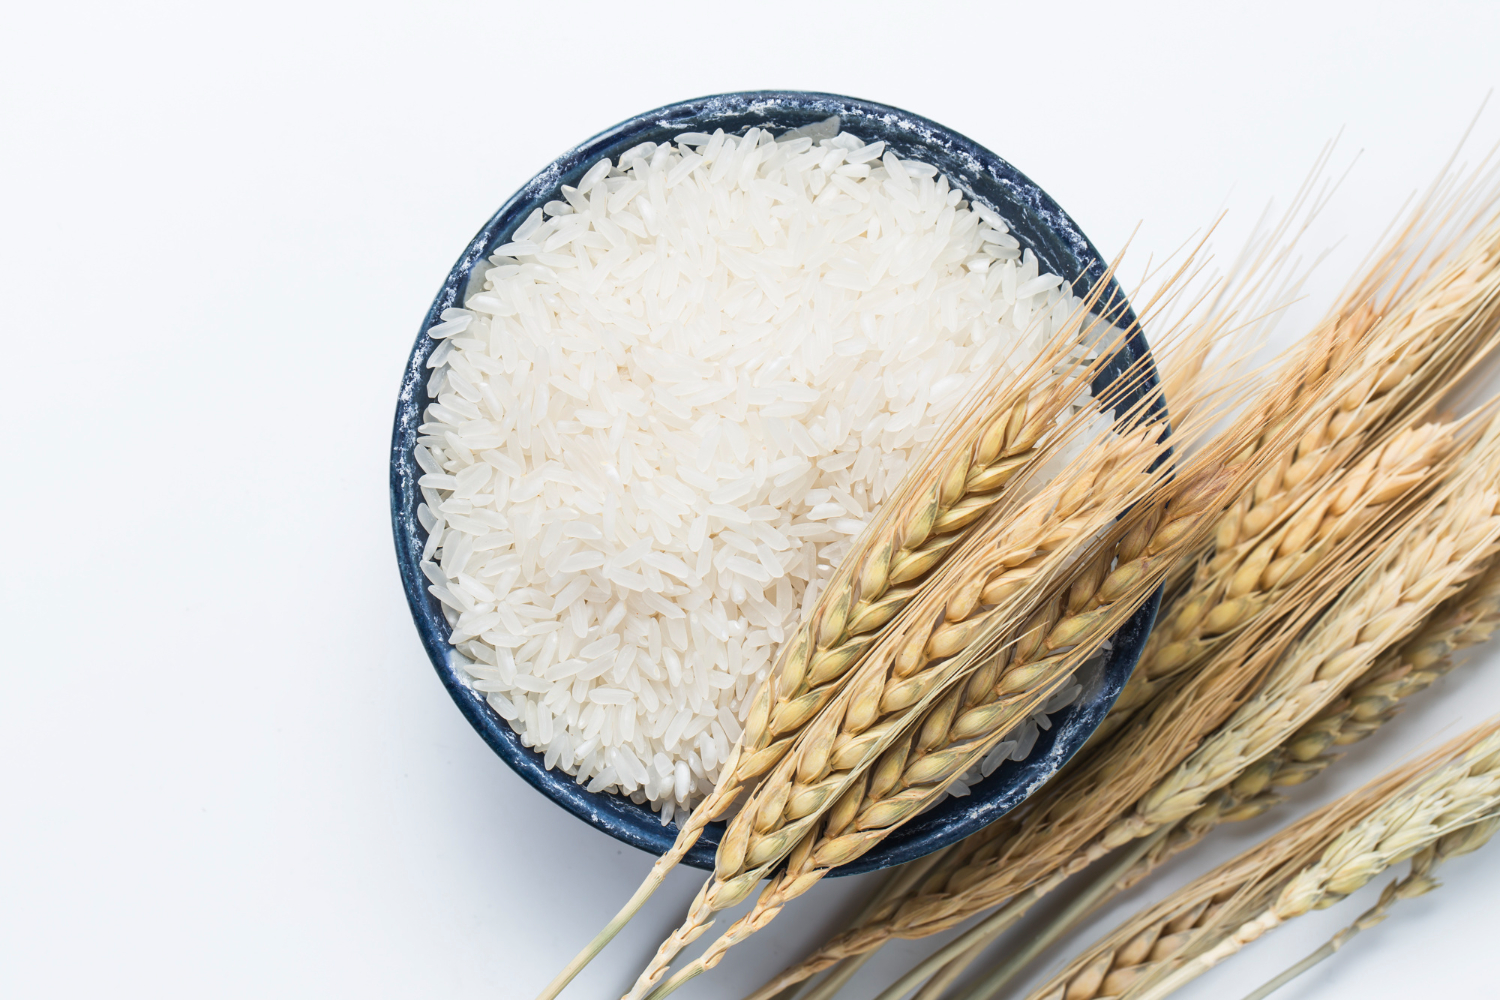 Rice products